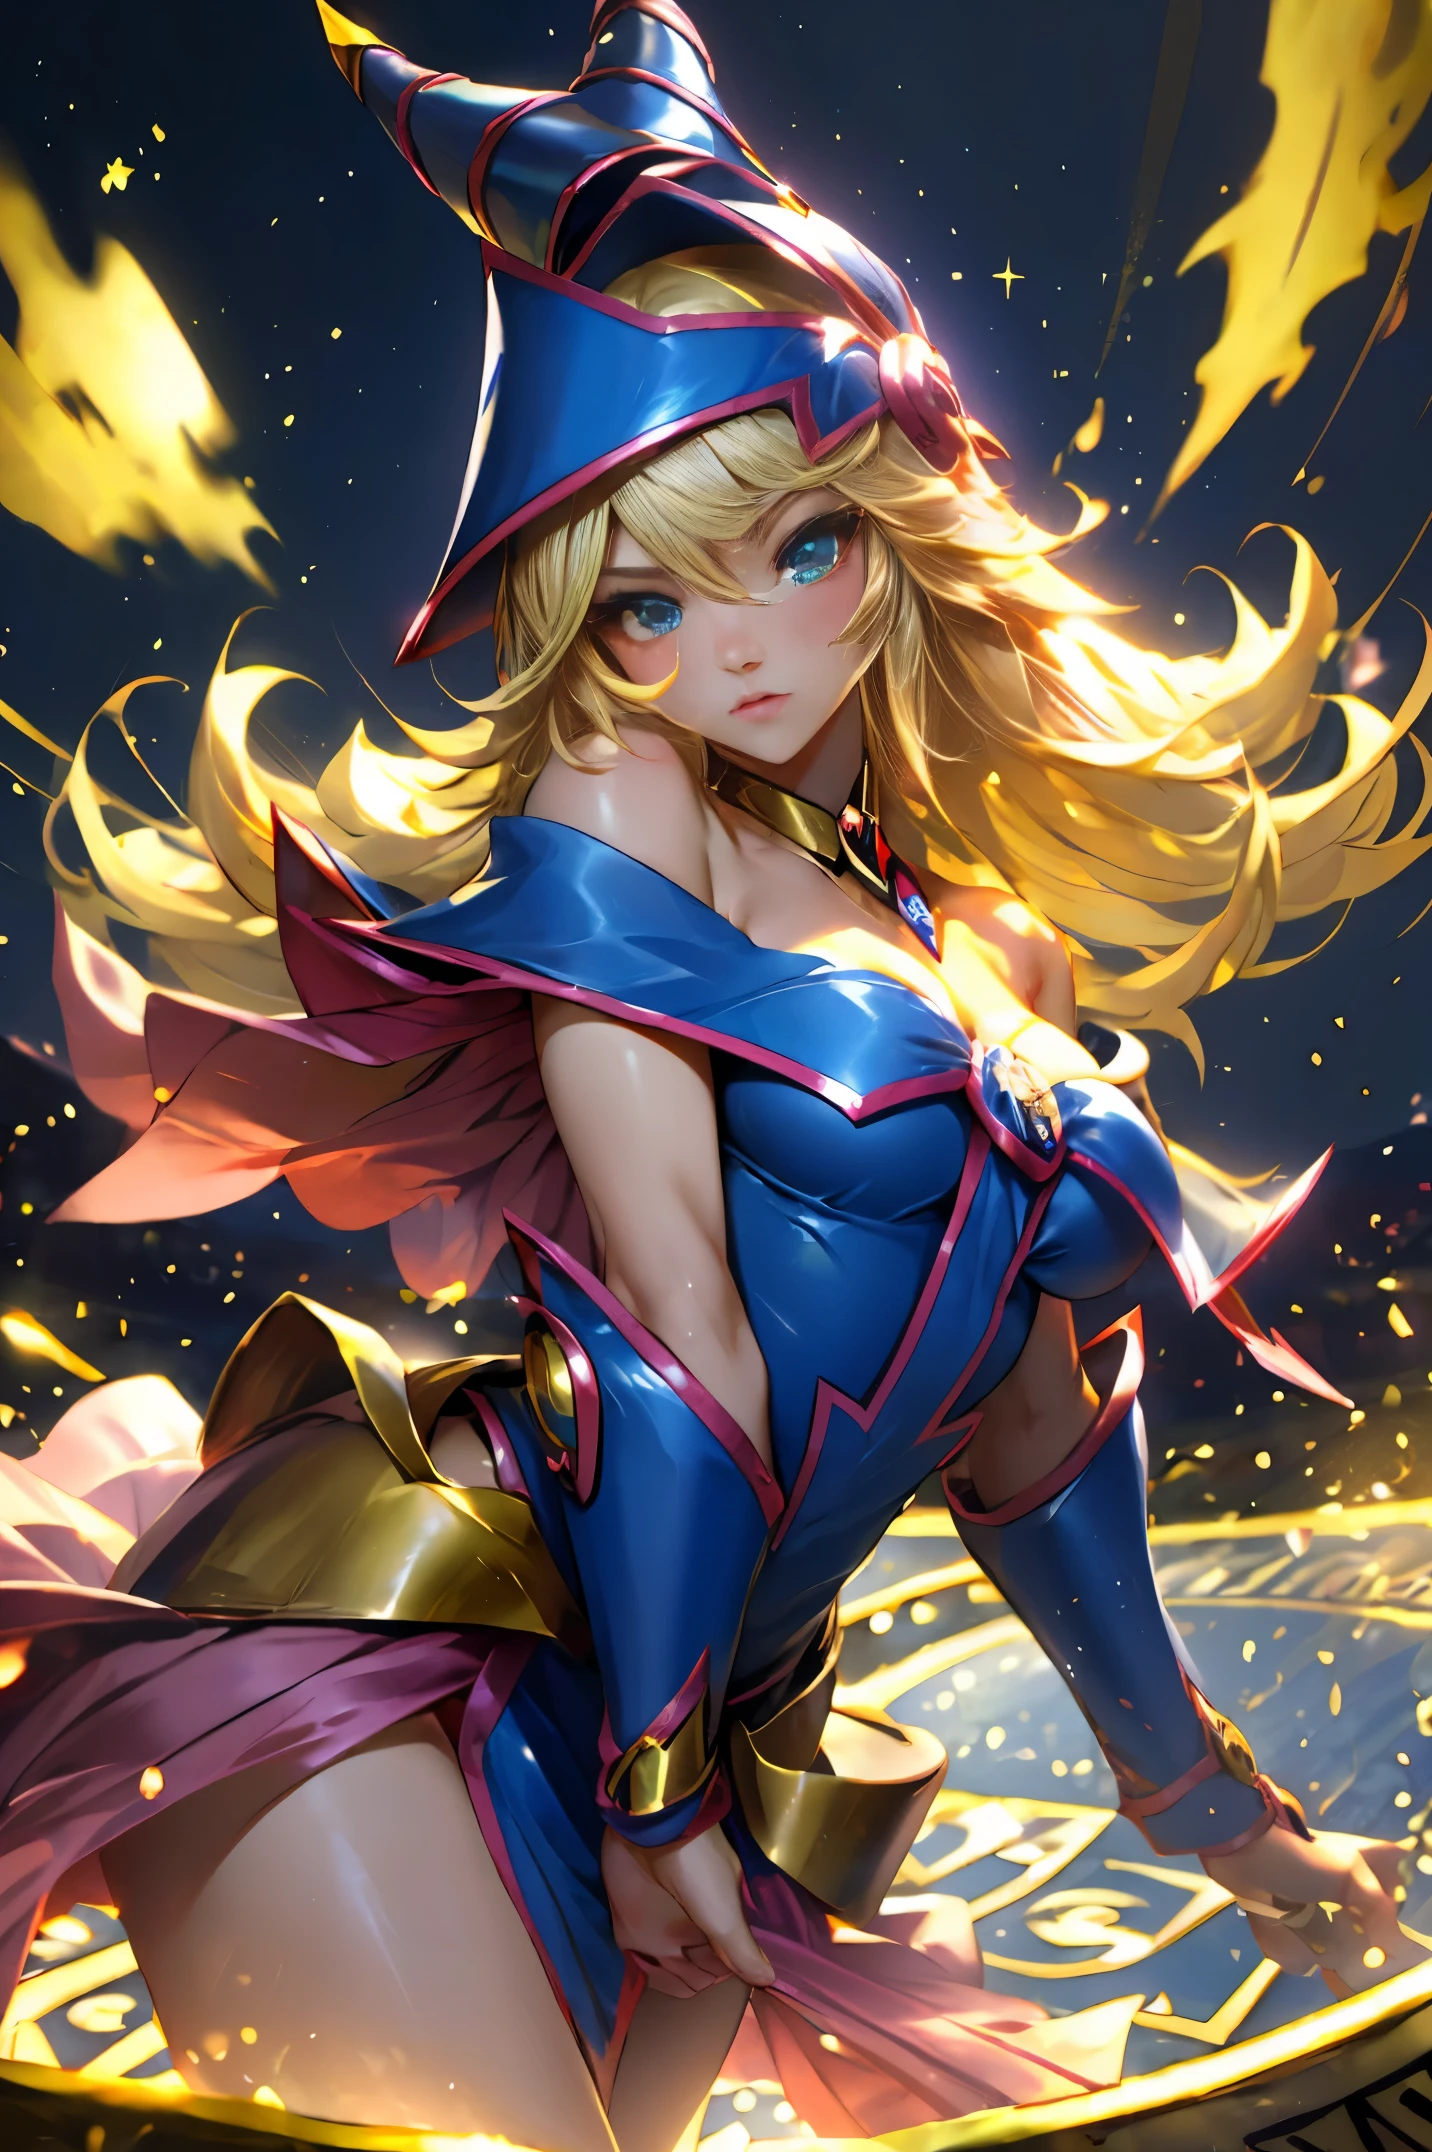 Dark magician gils dressed as the sand goddess from Saint Seiya. Vestido white, tight, white. blond hair. blue eyes. Red lips. Whole body. Athena background. Sensual and innocent pose. Magic circle around you. Heart magic in the air. 